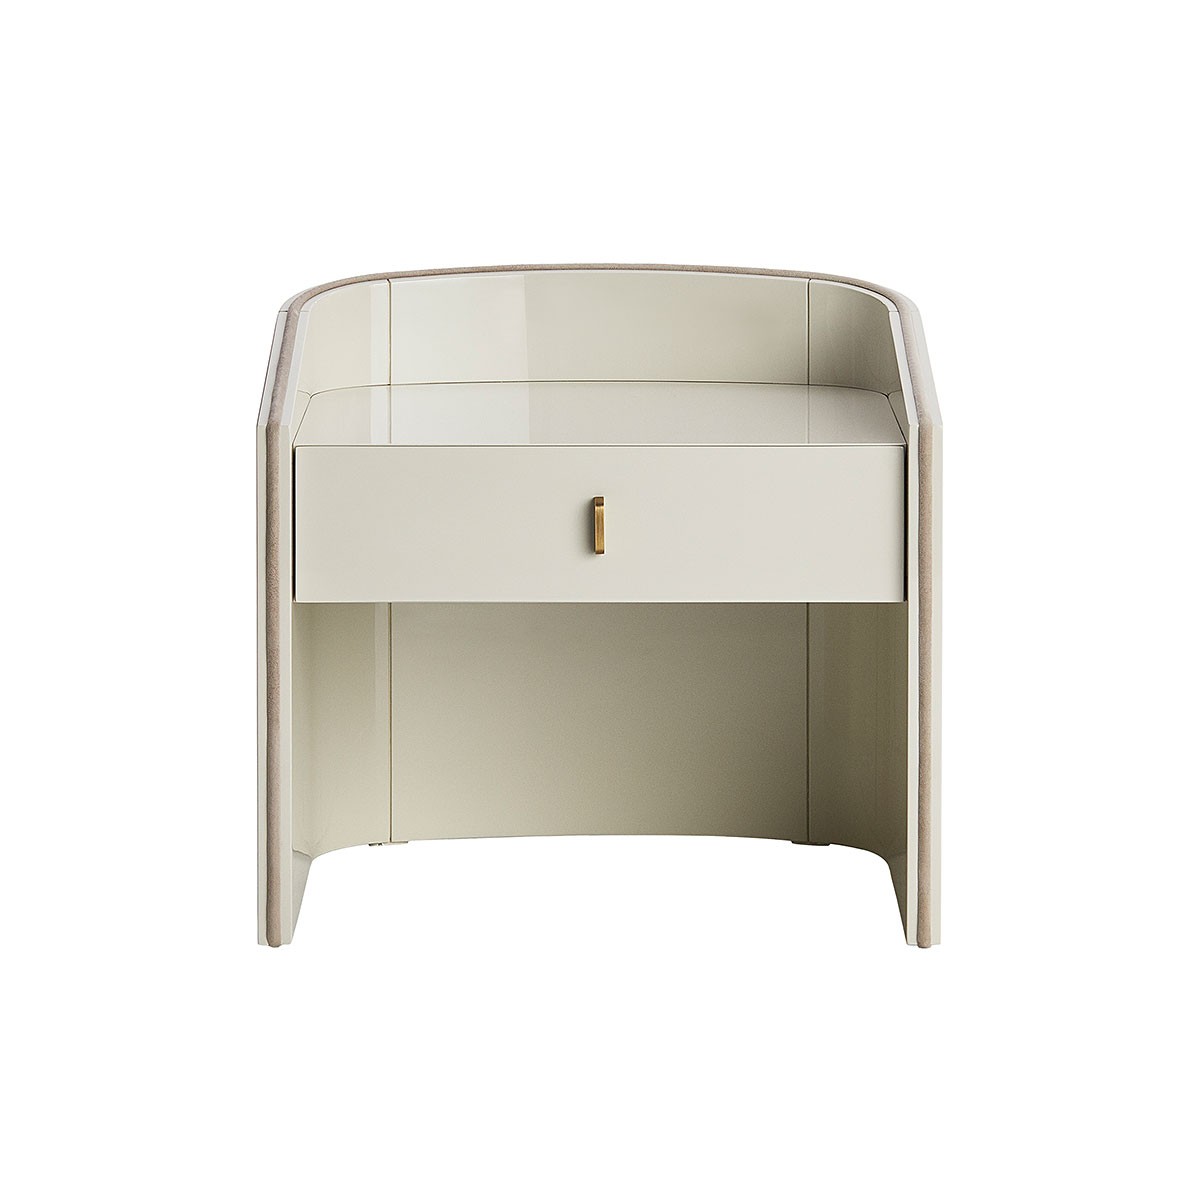 The Aurora Bedside Table